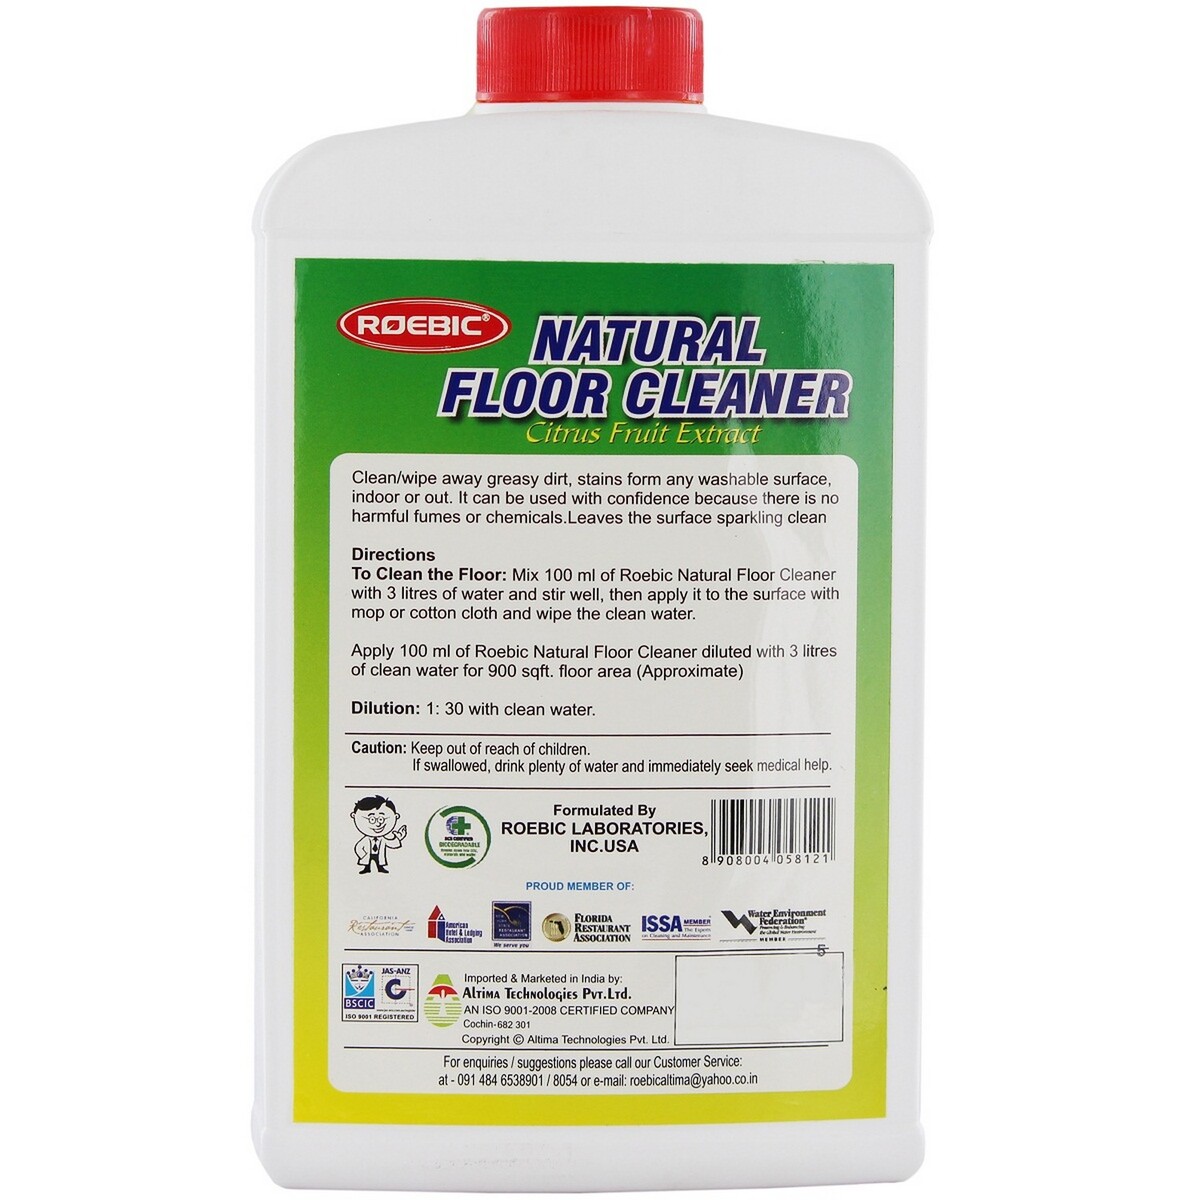 Roebic Natural Floor Cleaner Citrus Fruit Extract 1Litre